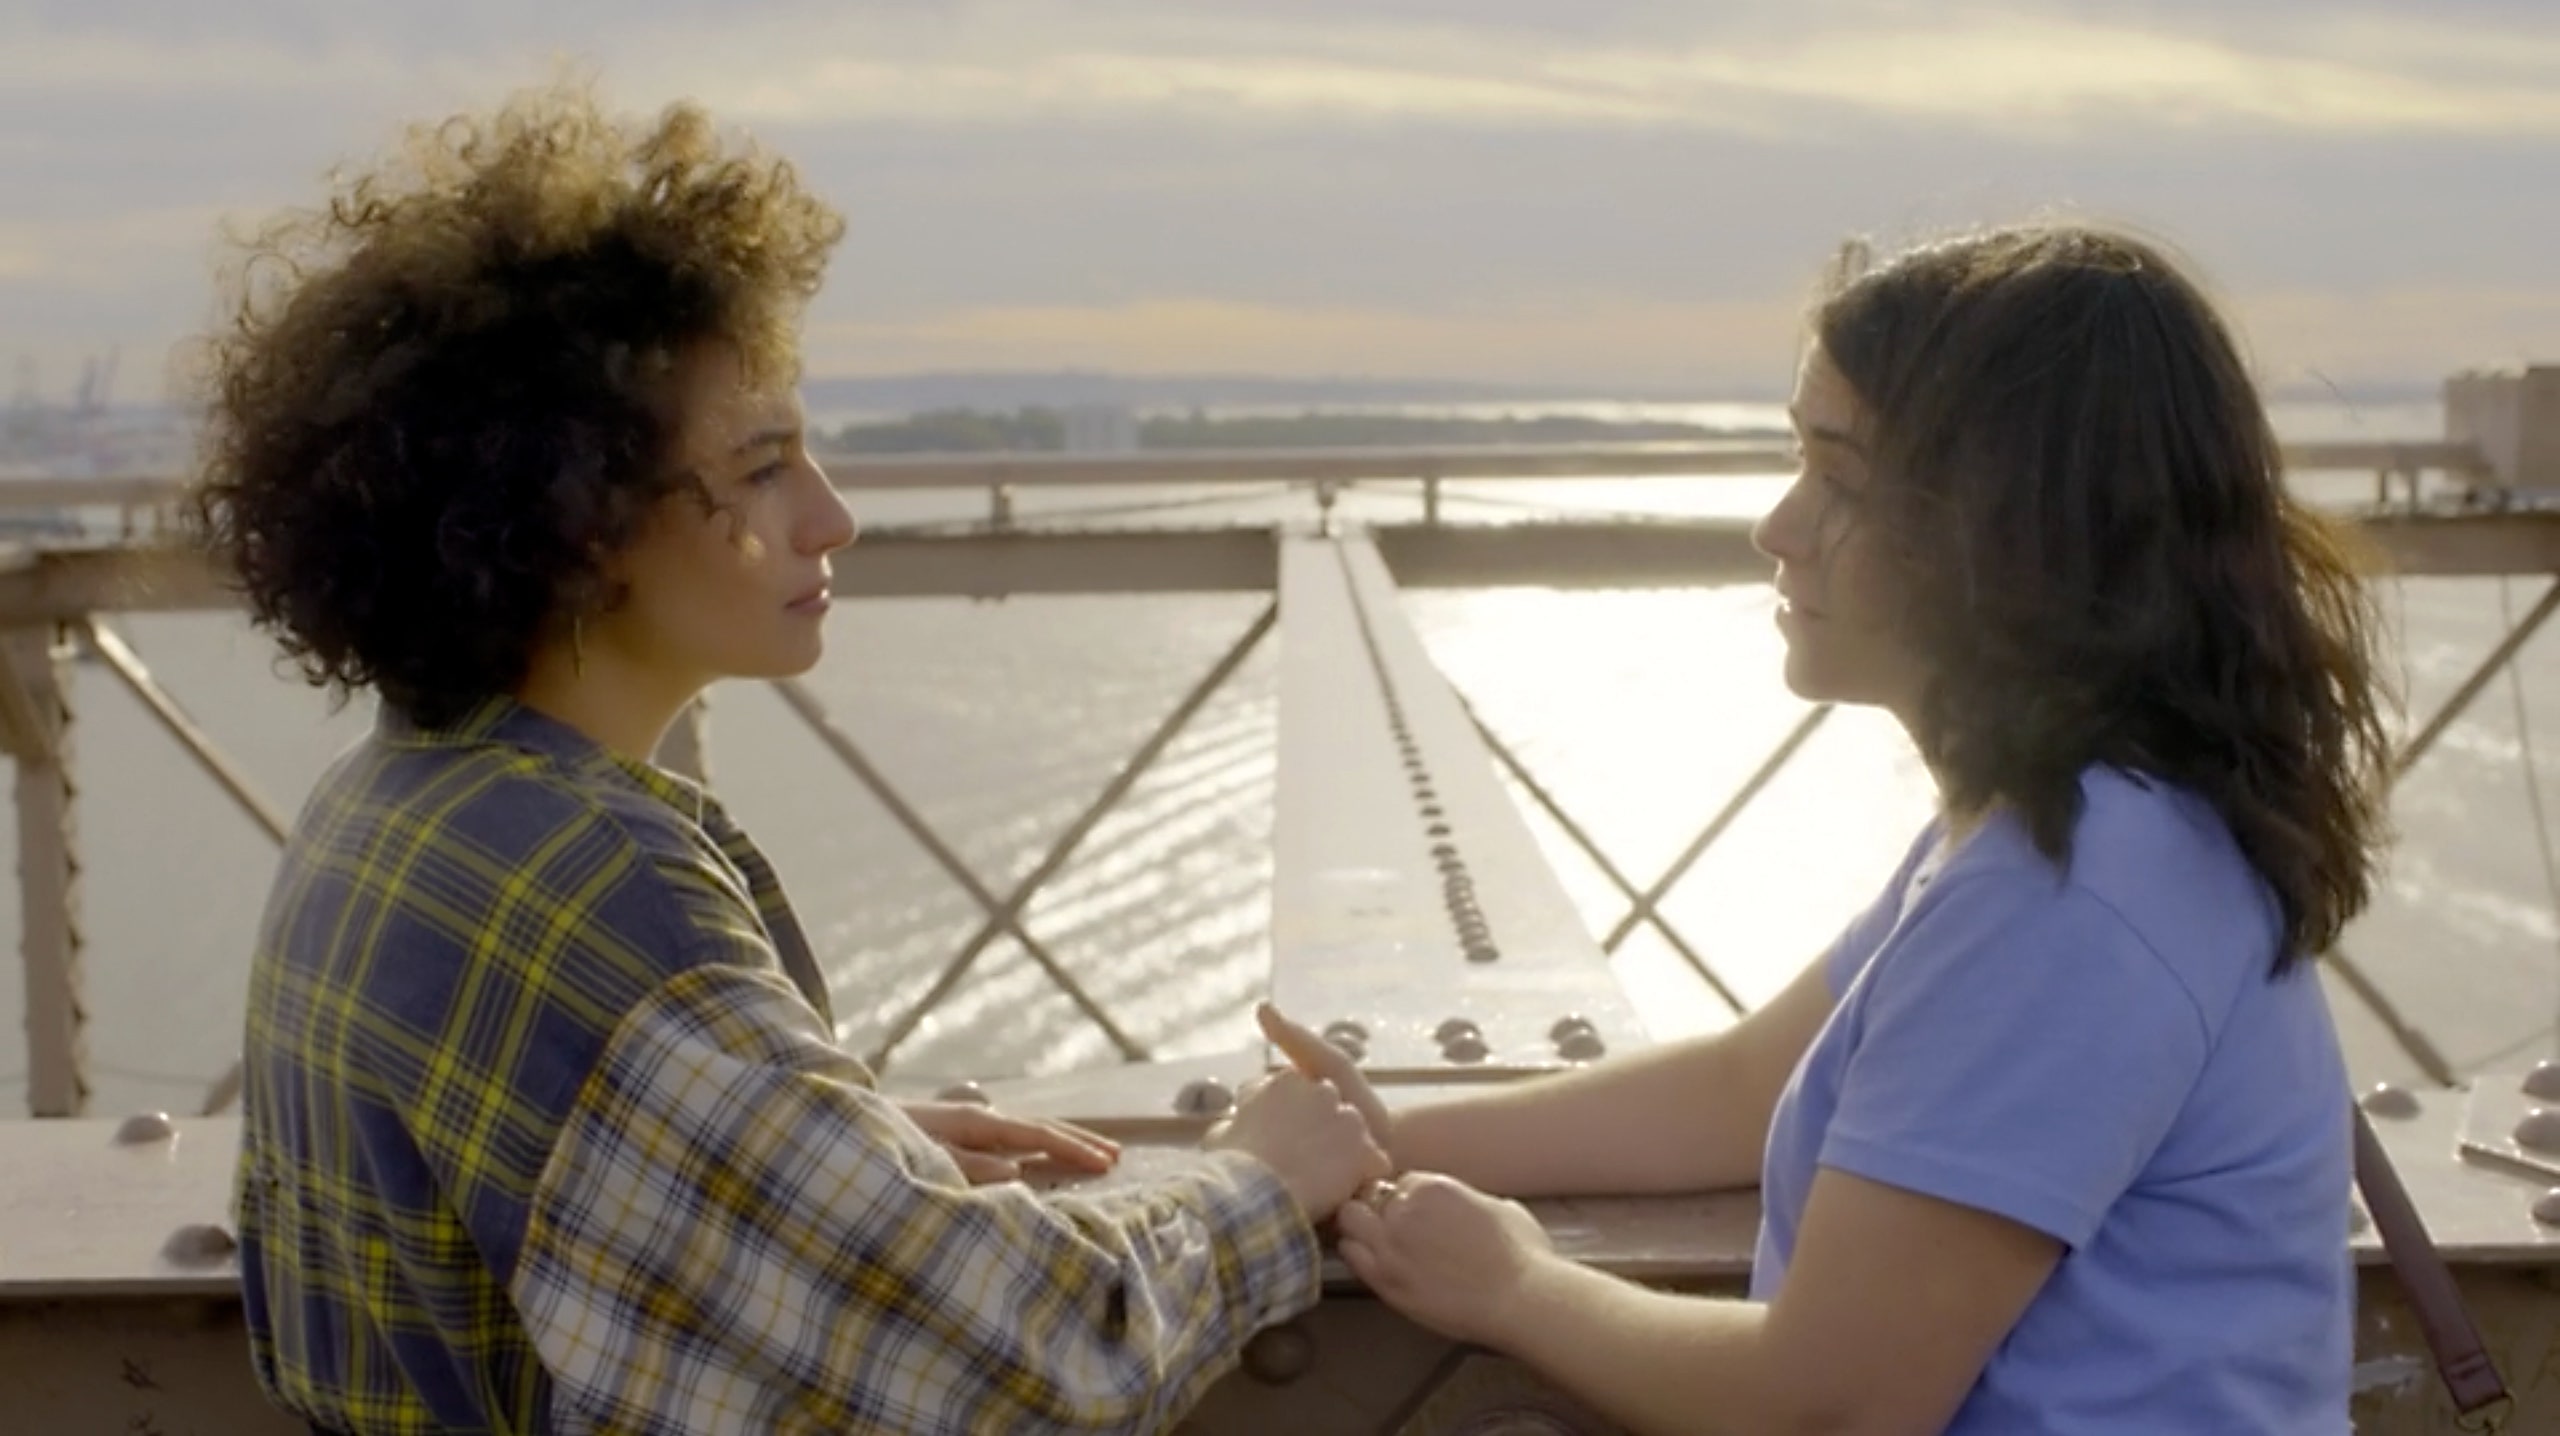 Ilana and Abbi holding hands talking on a bridge while overlooking a river.